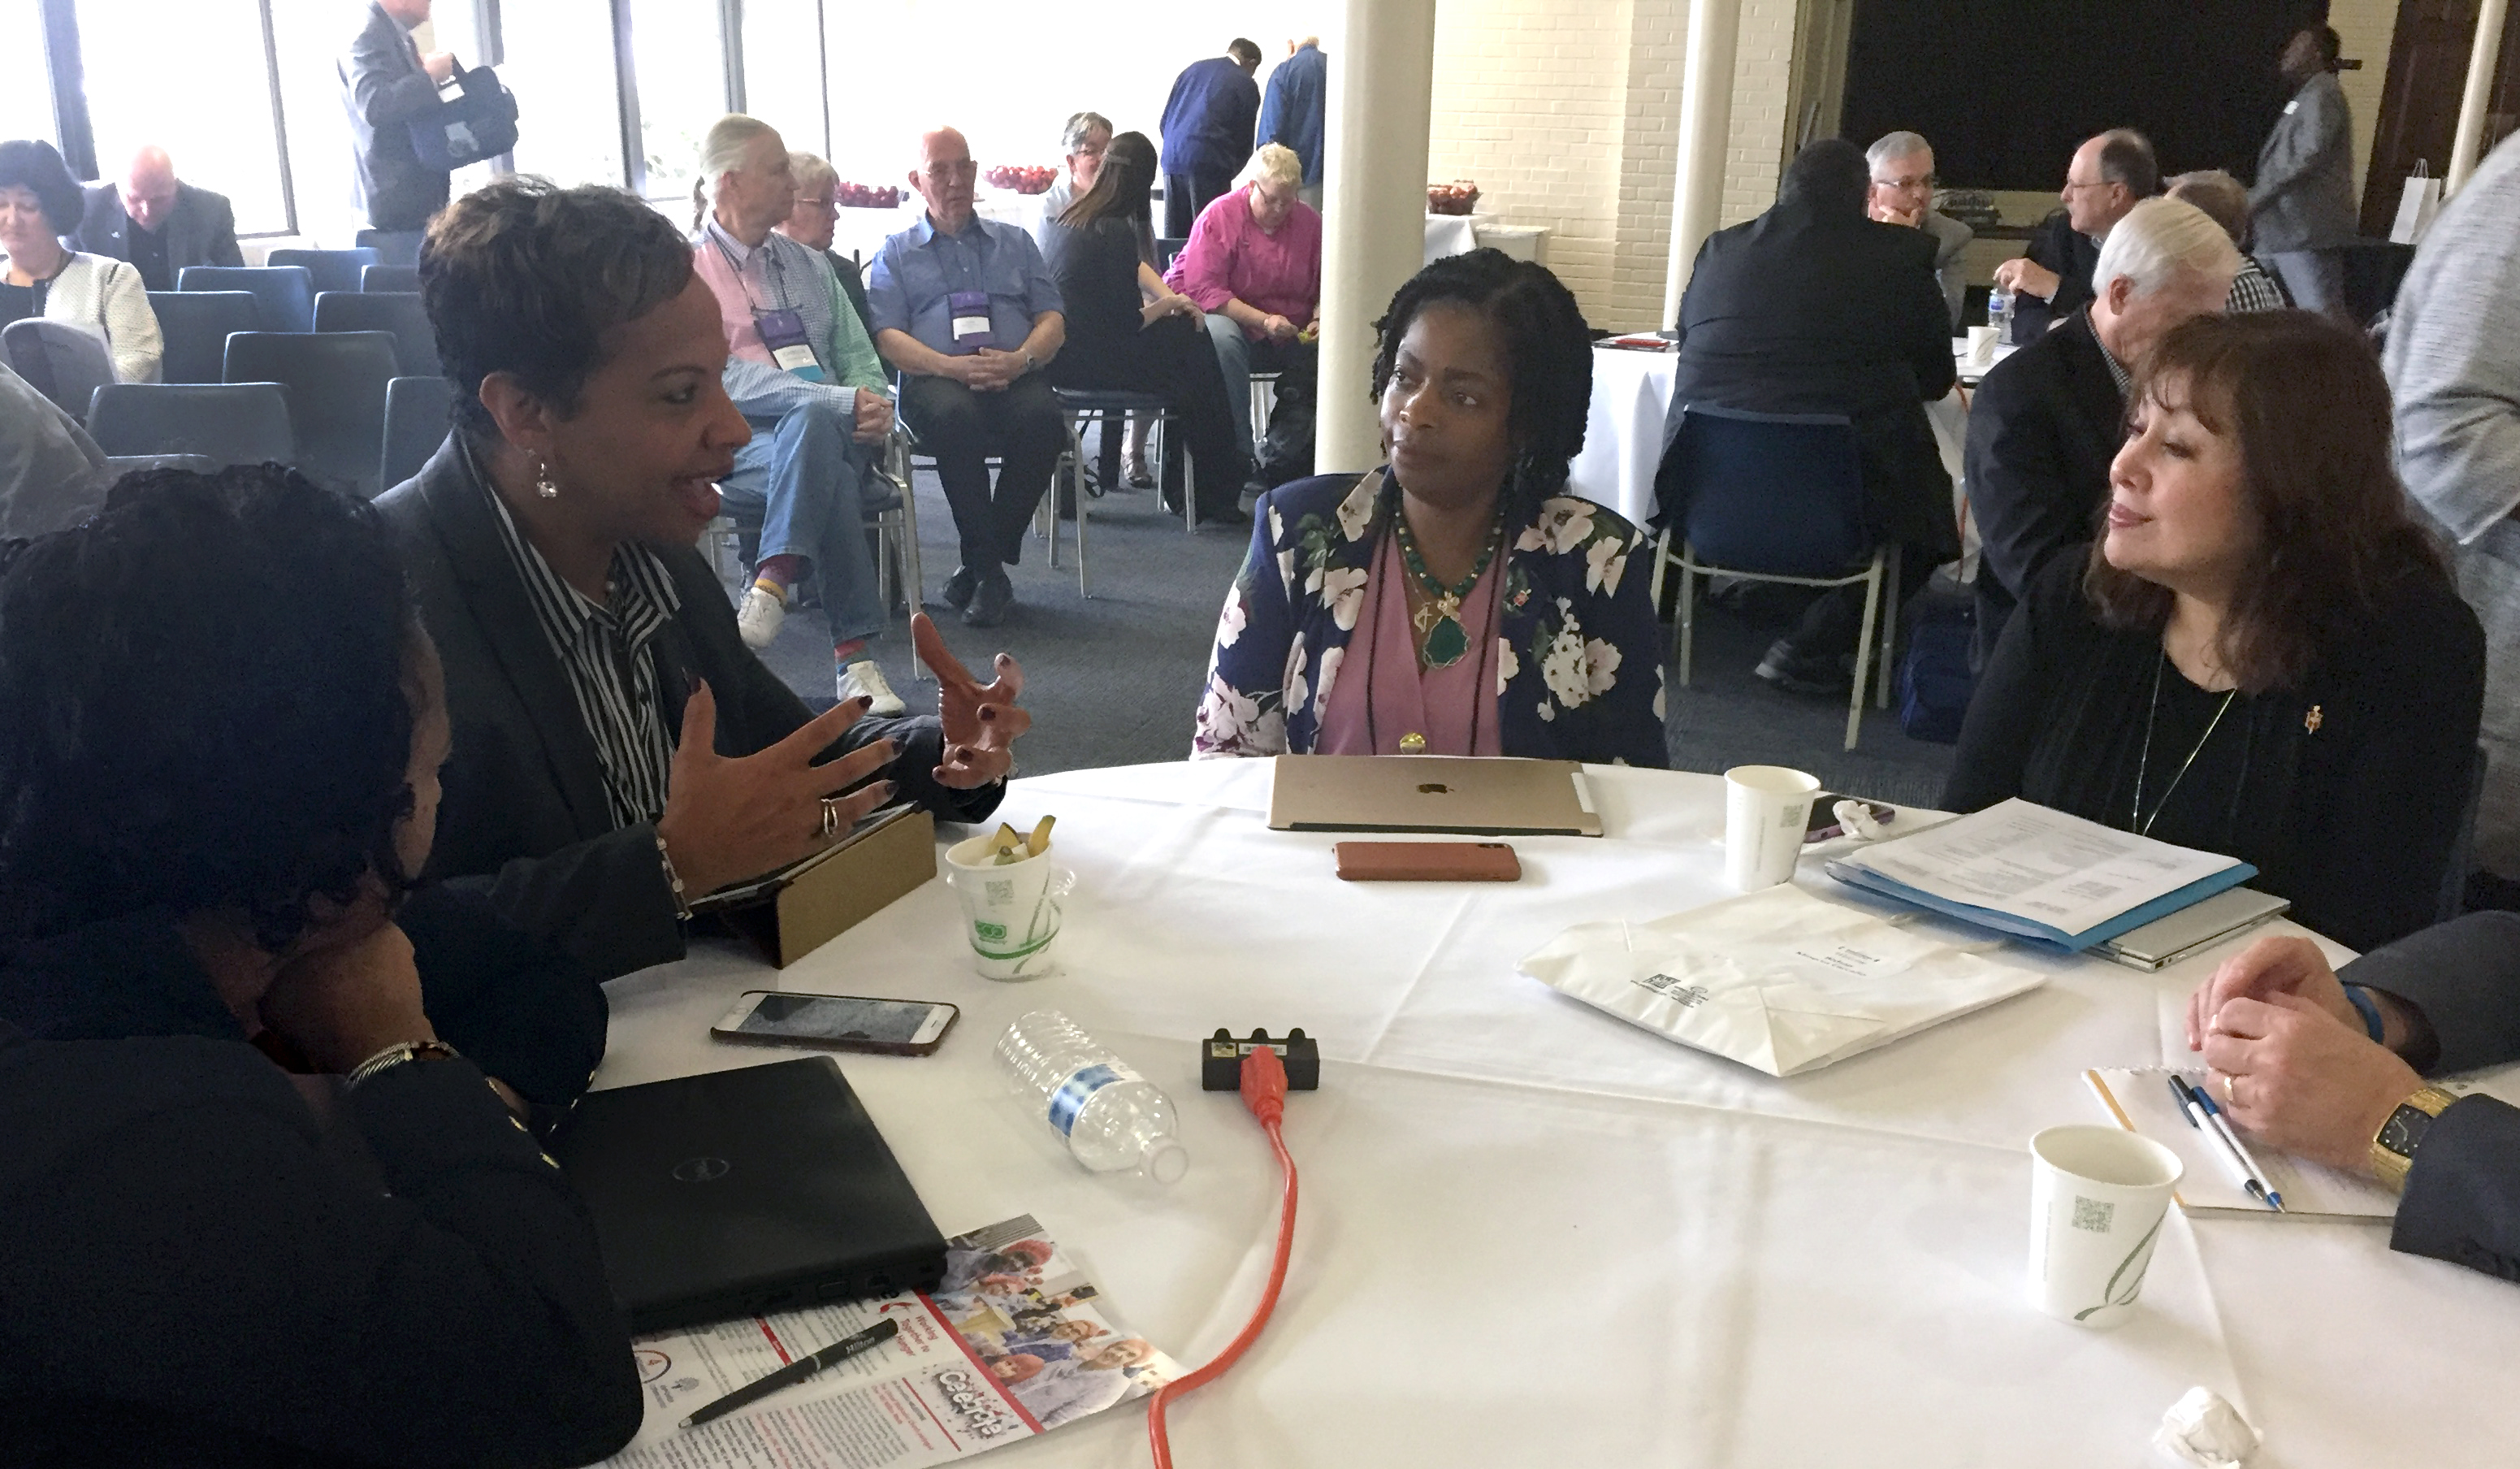 Bishops gather in small groups to discuss what scriptural imagination means in this uncertain season in the church. From left are Bishops Sharma Lewis, Tracy Smith Malone (speaking), Cynthia Moore-Koikoi and Minerva Carcaño. Photo by Heather Hahn, UMNS.